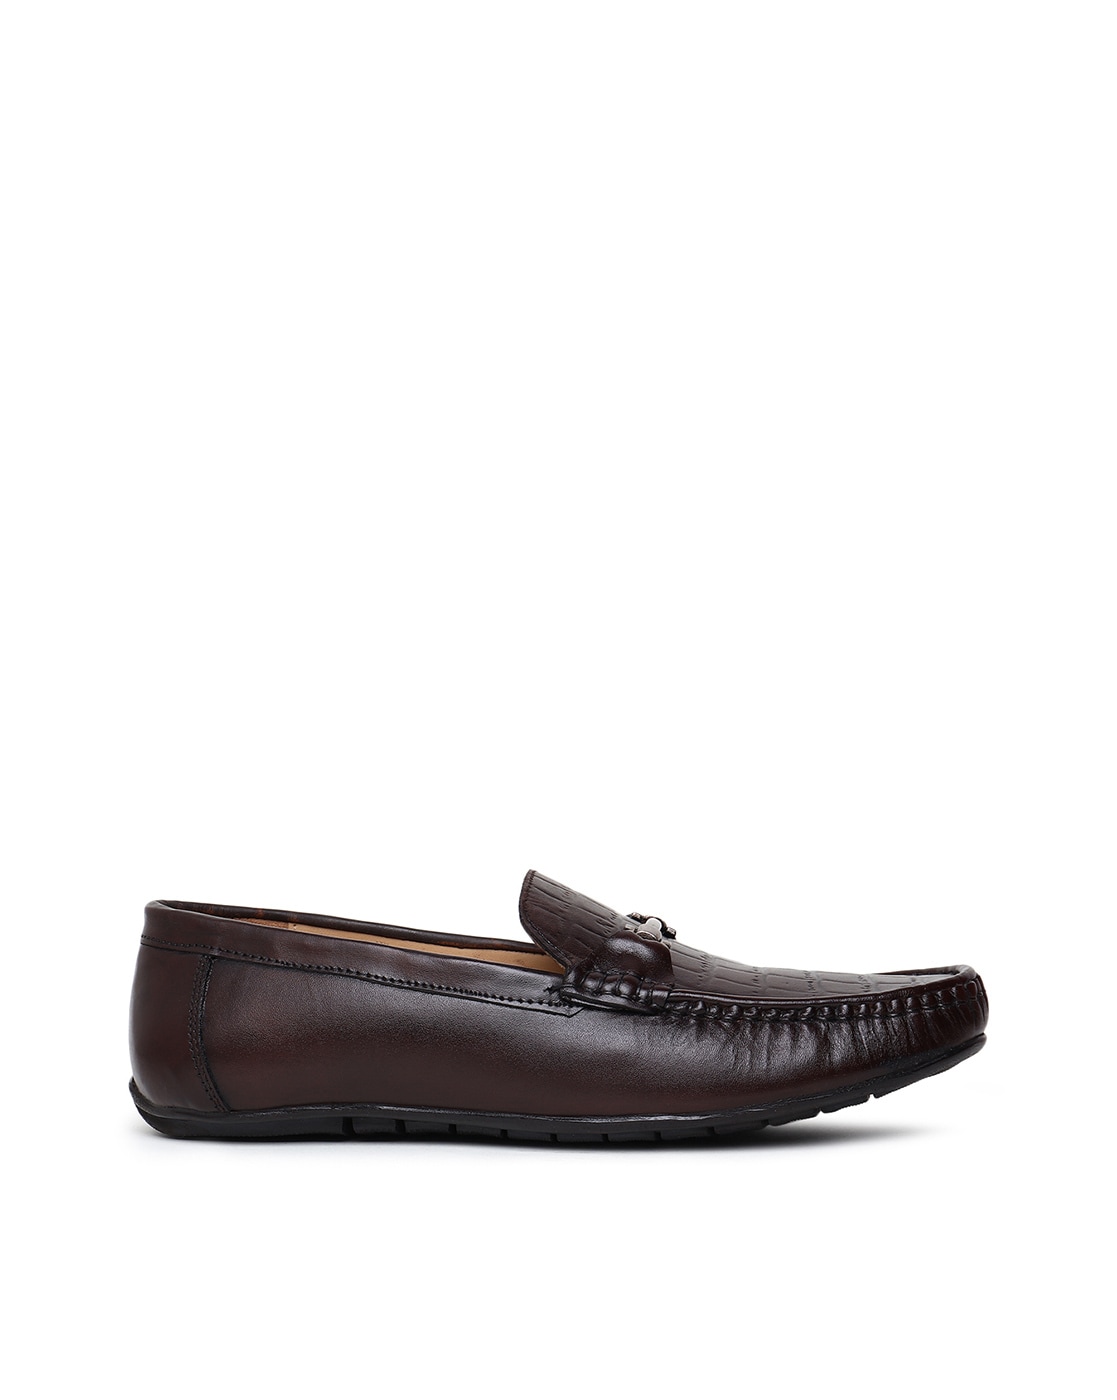 Men Round-Toe Loafers with Metal Accent